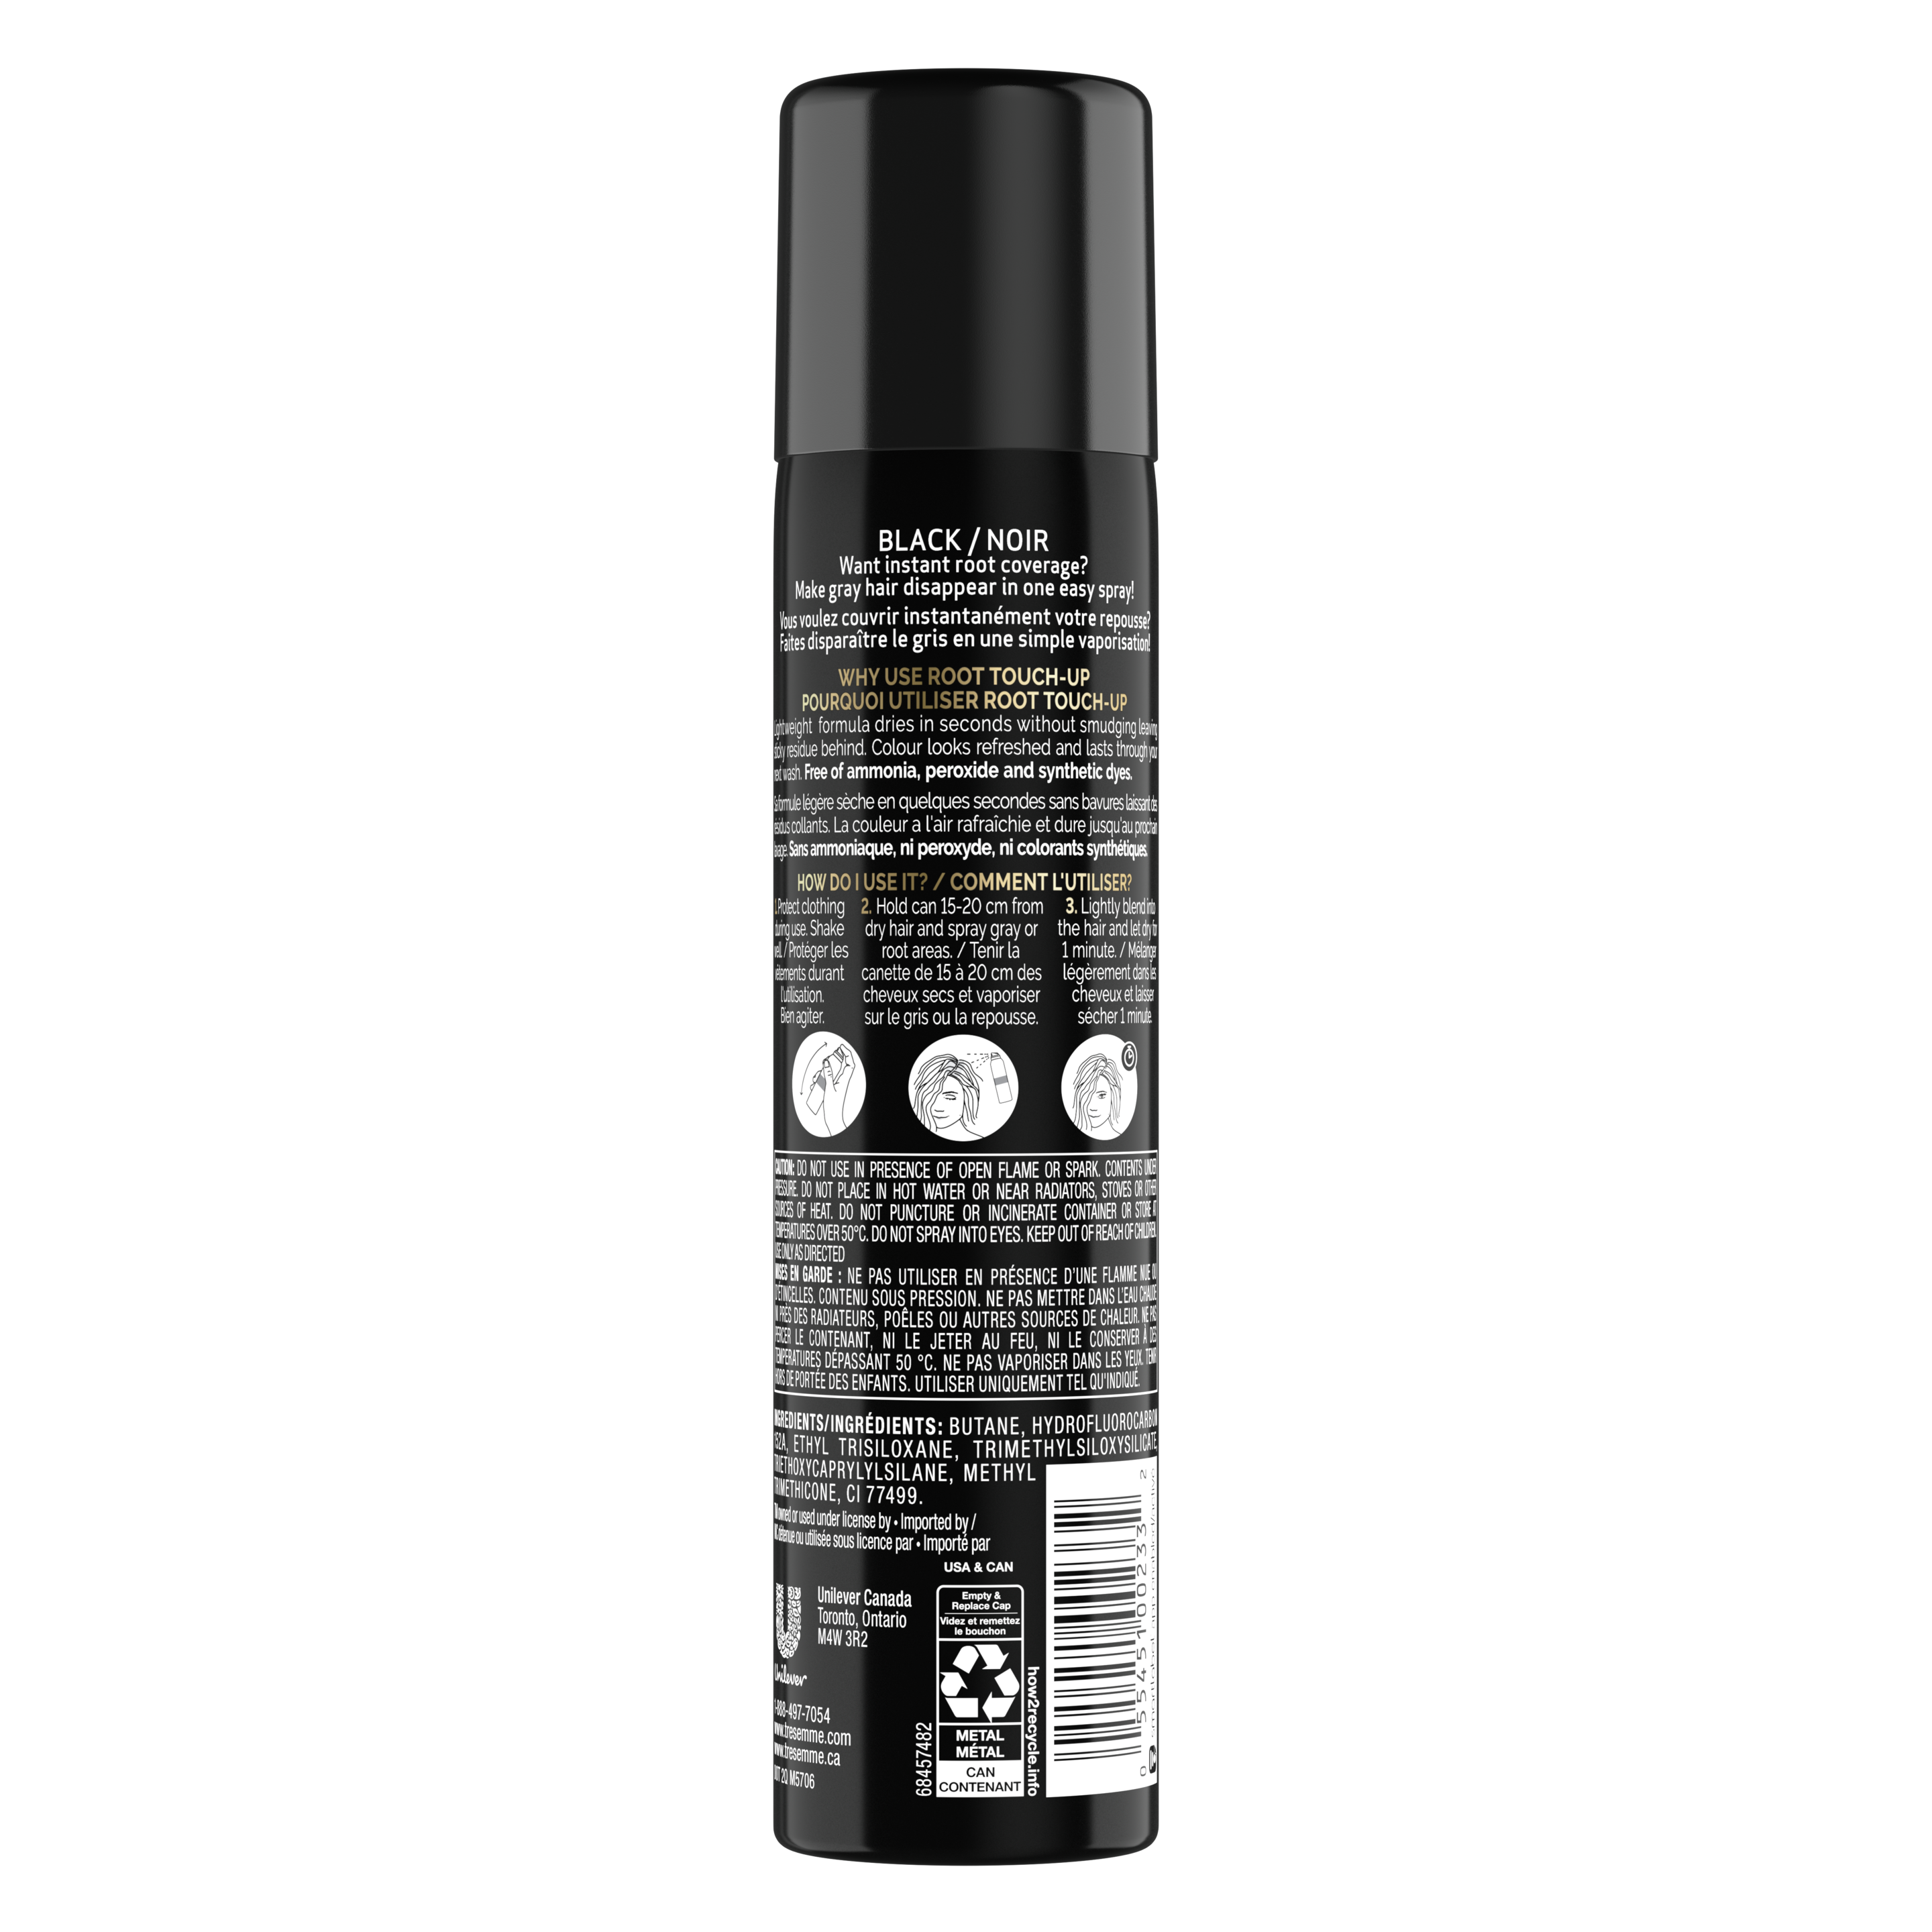 TRESemmé Root Touch Up Spray for Black Hair 70.8g back of pack